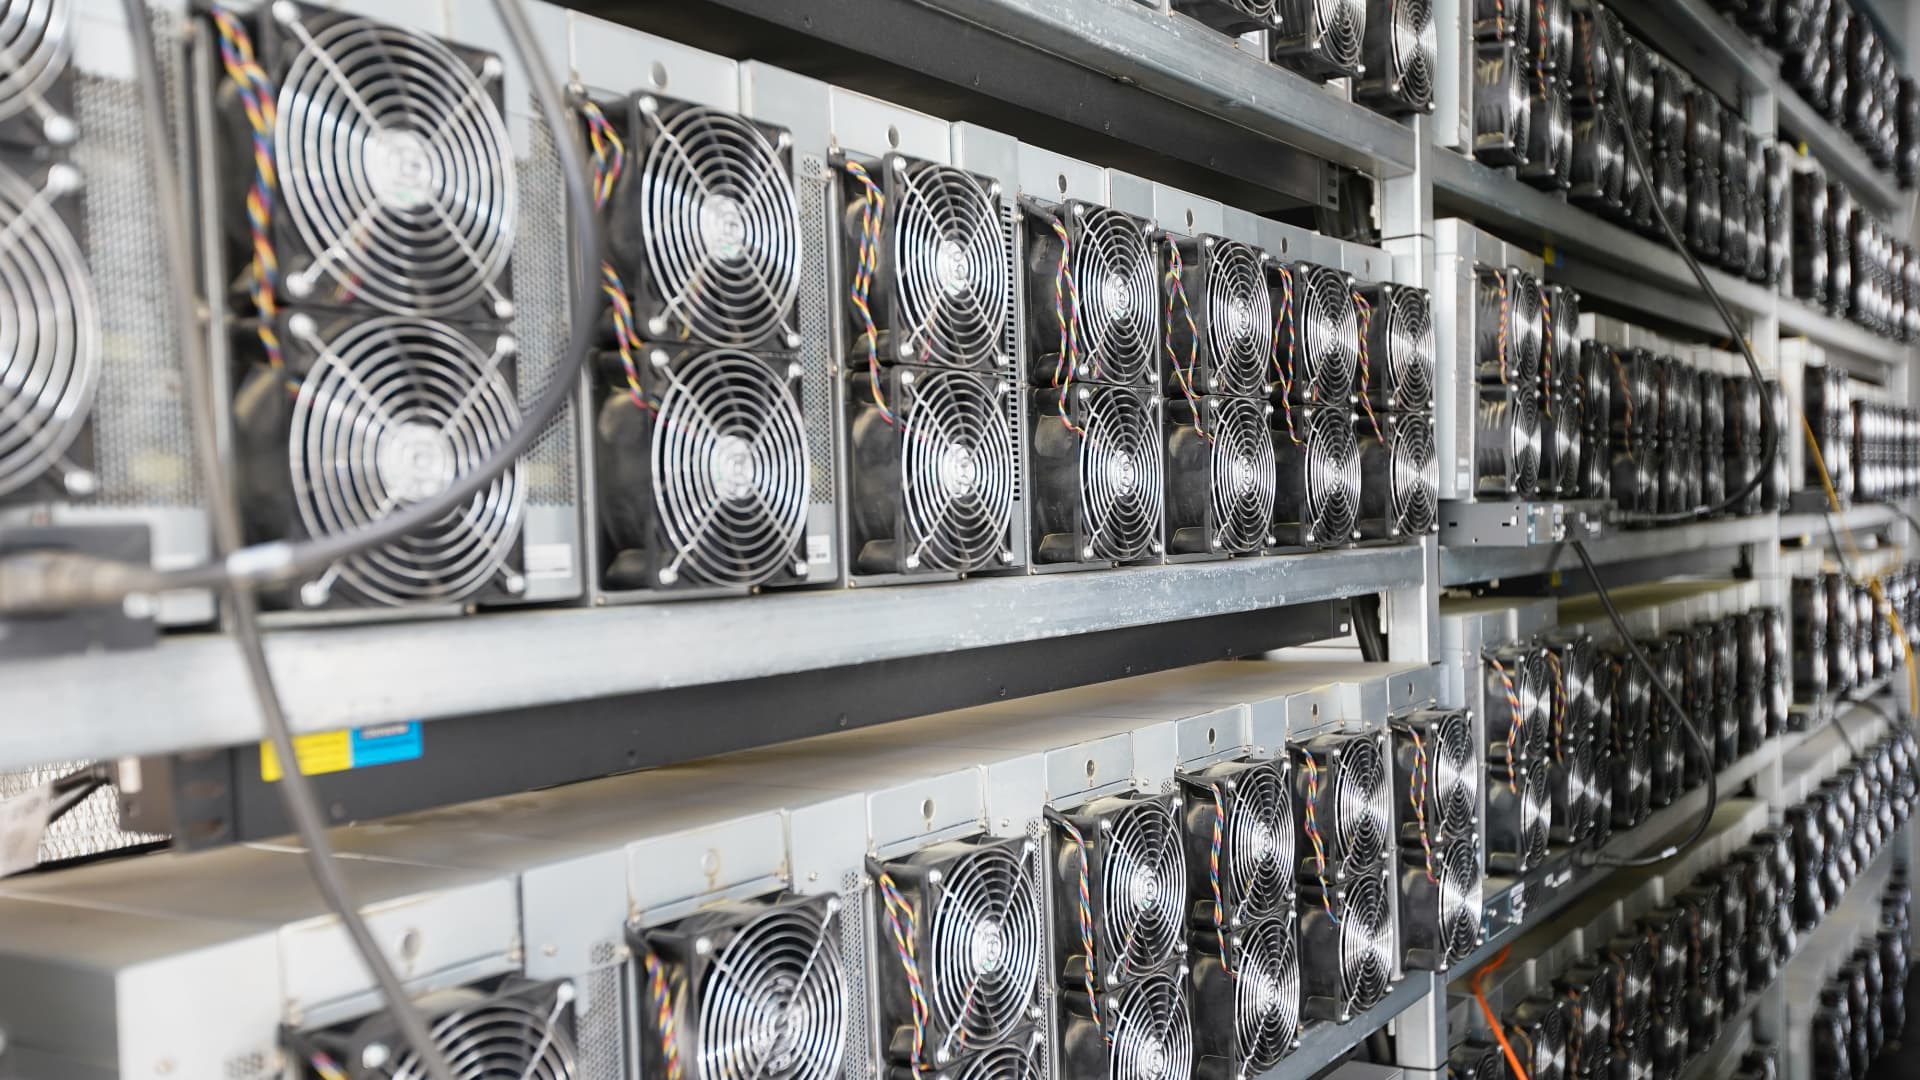 CleanSpark jumps on plans to buy 4 bitcoin mining facilities